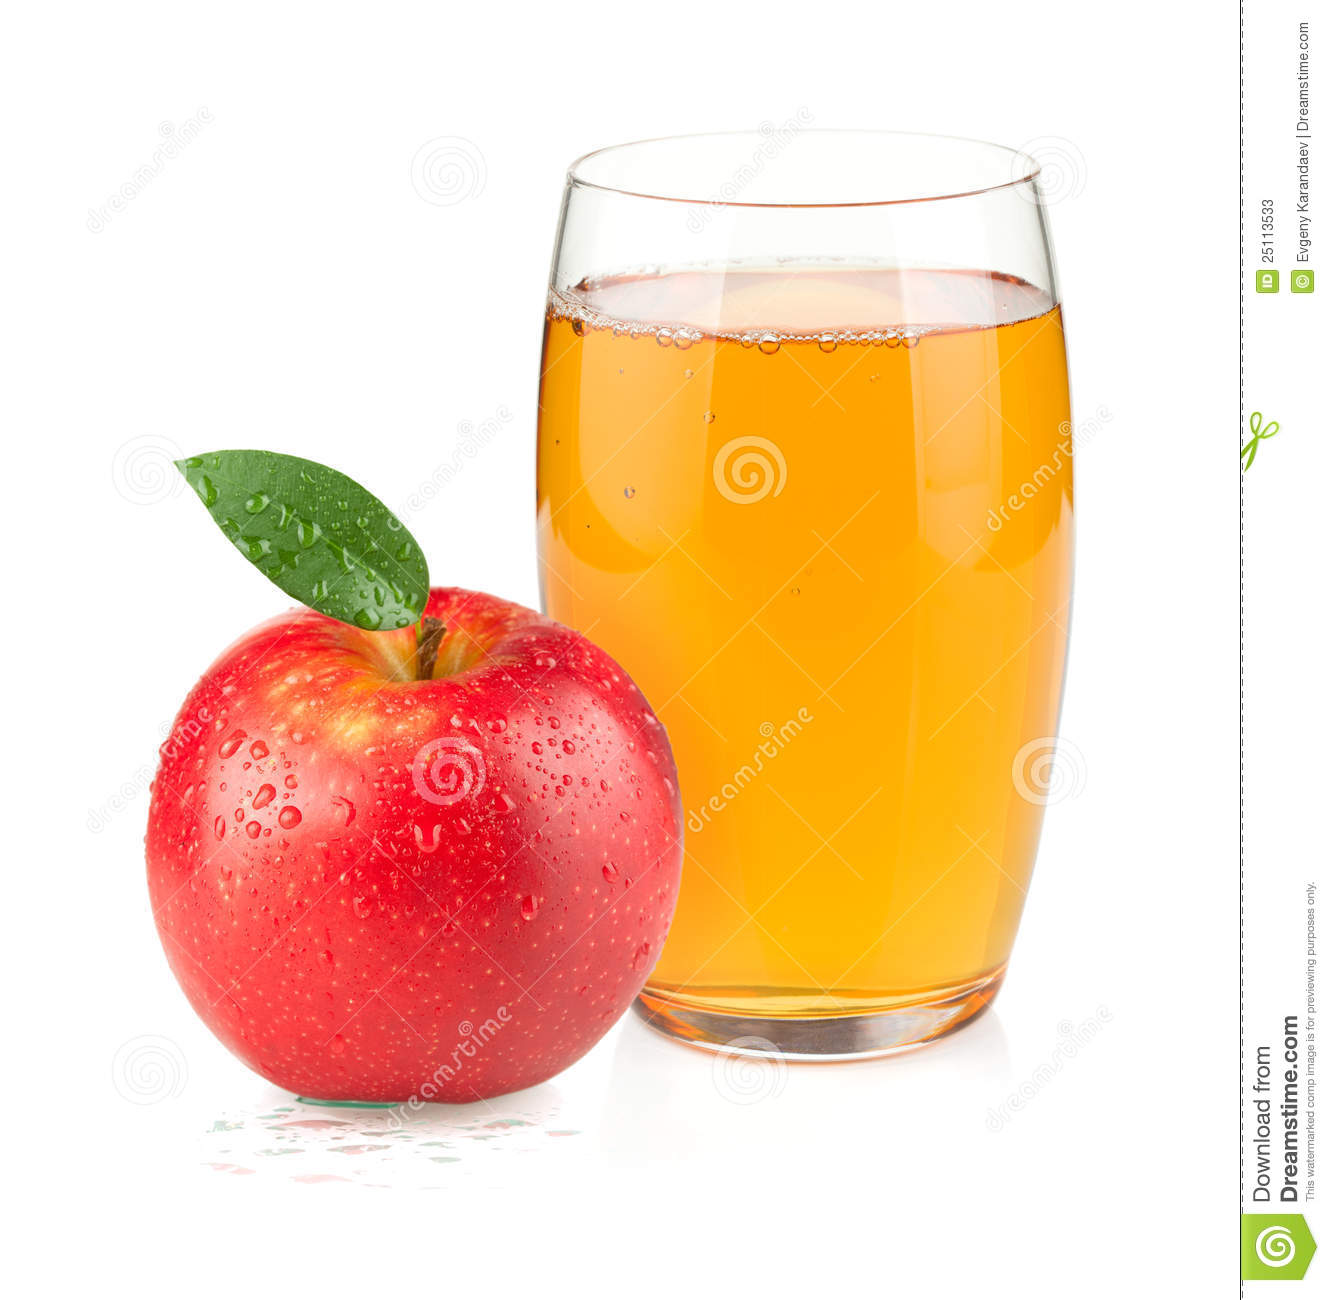 More Similar Stock Images Of   Apple Juice In A Glass And Red Apple